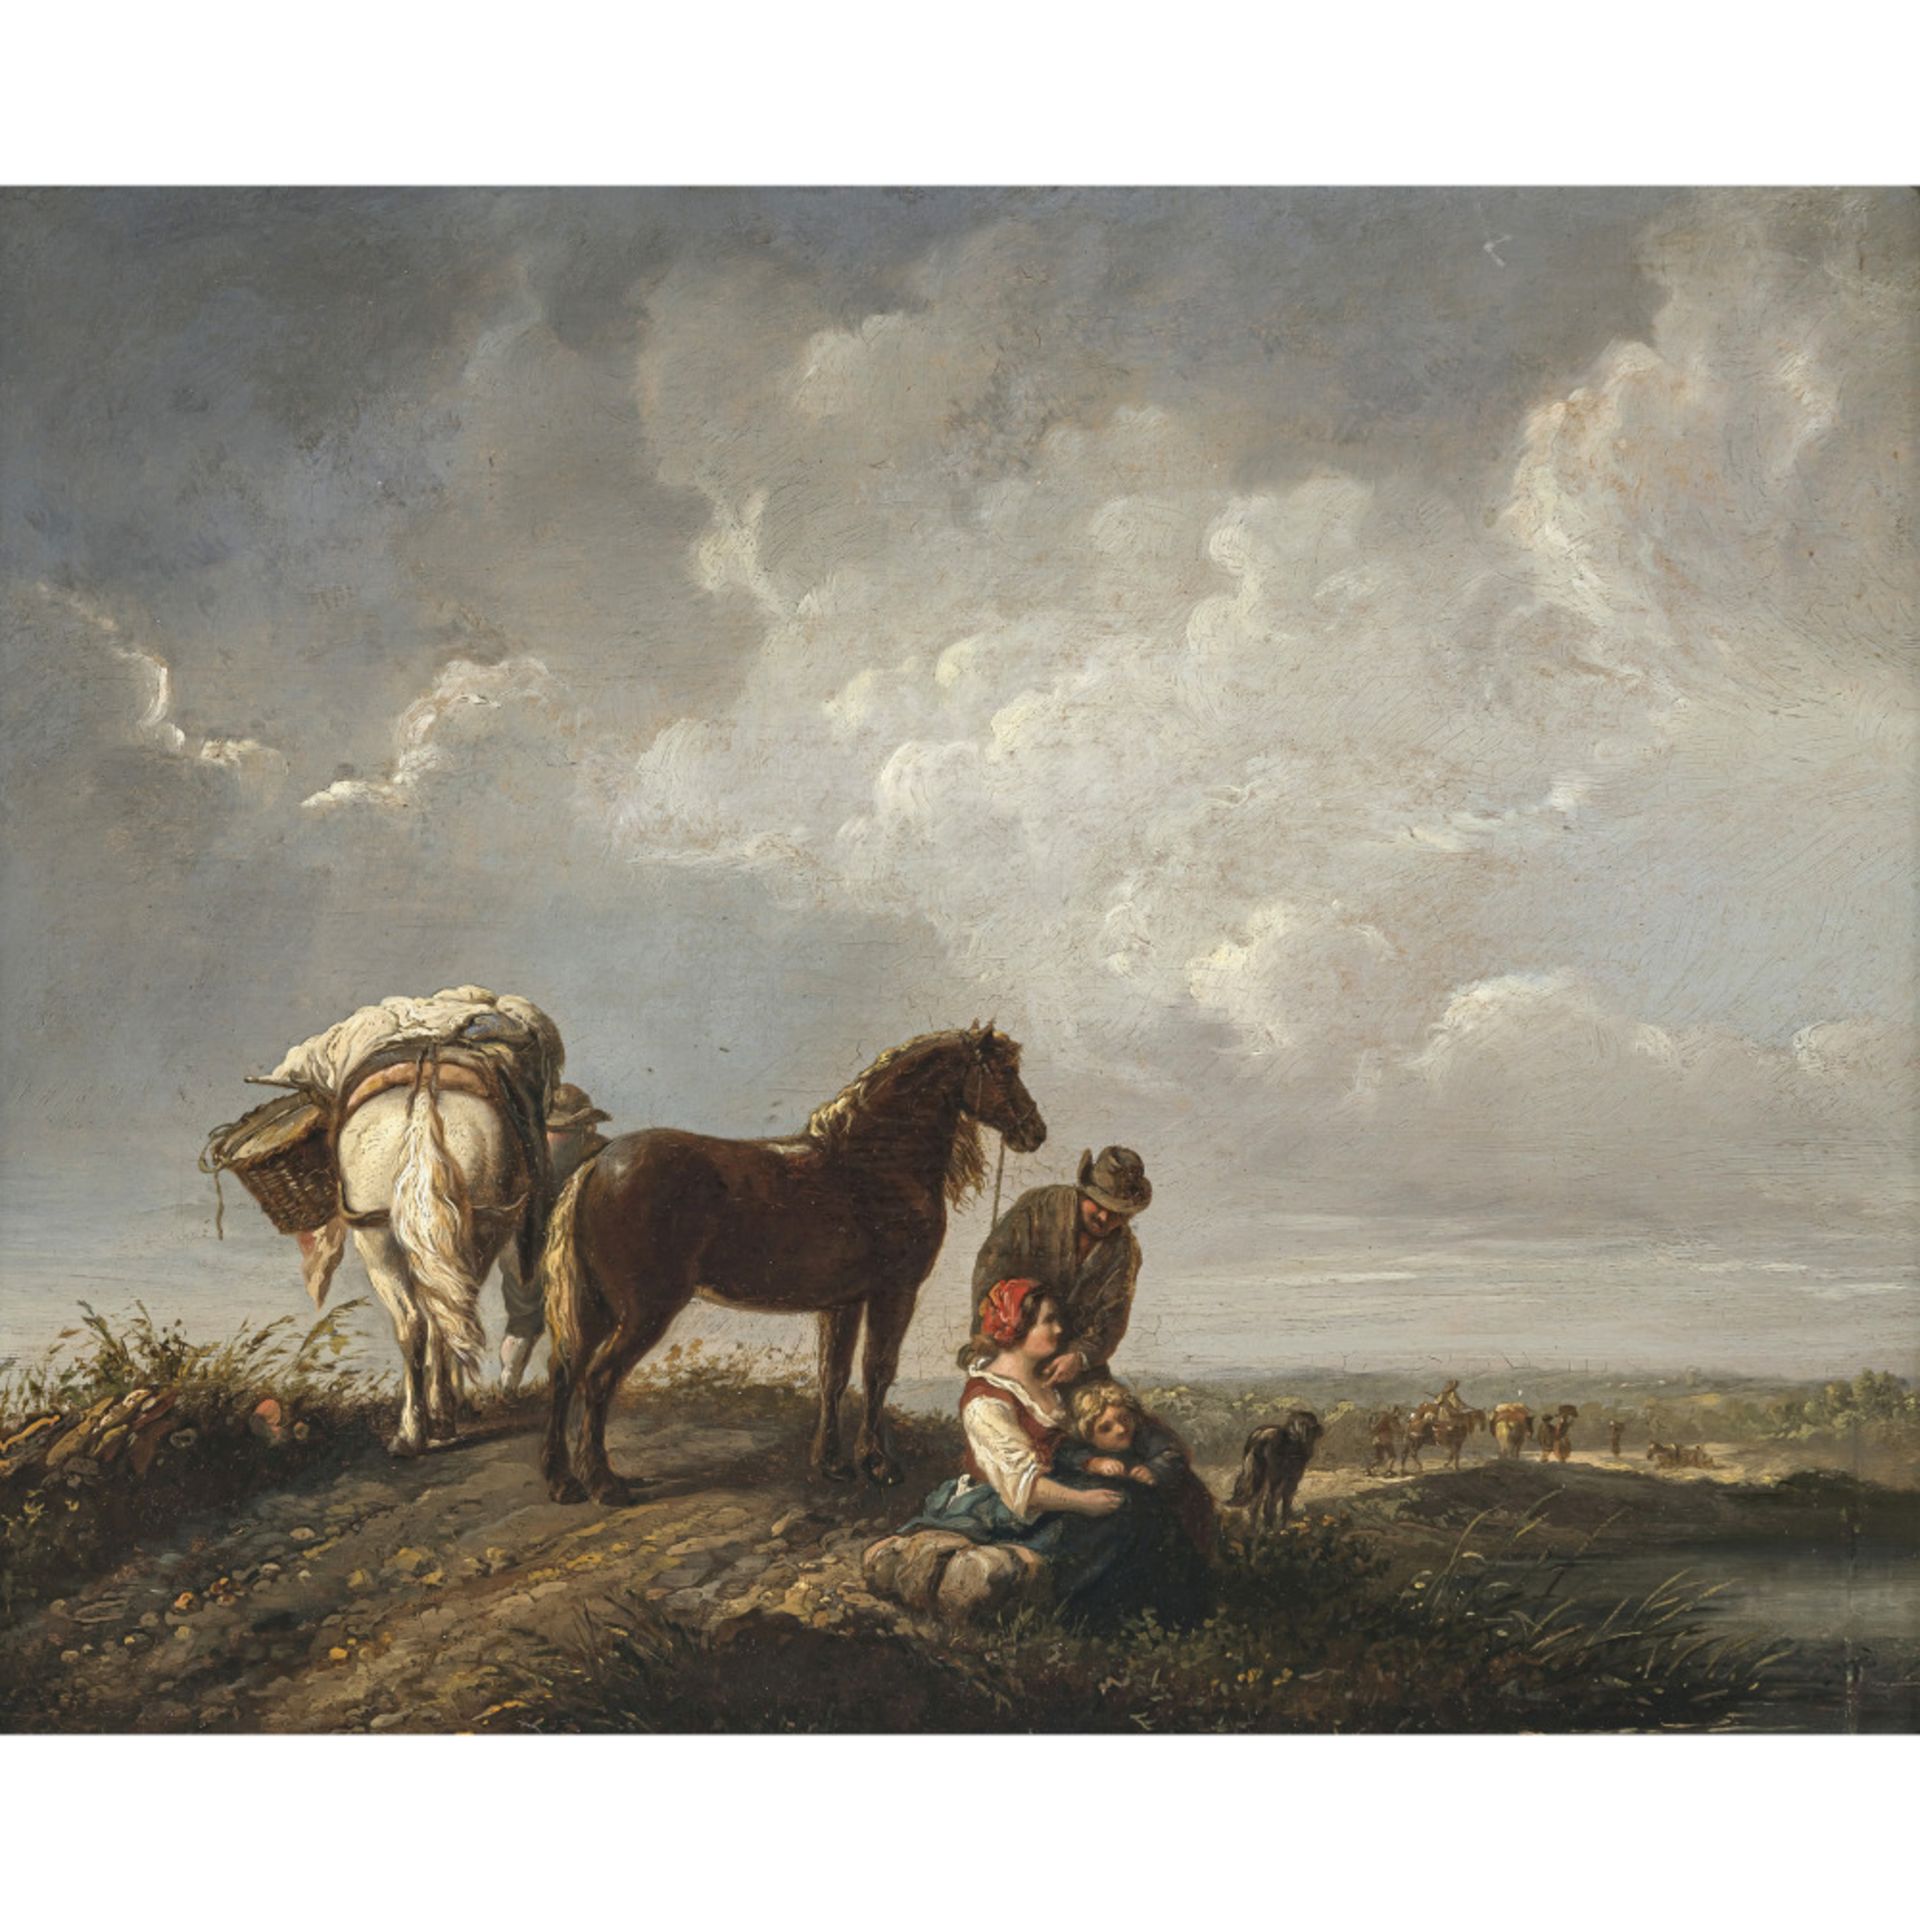 Niederlande 17th/18th century - Resting peasant family with two horses in extensive landscape